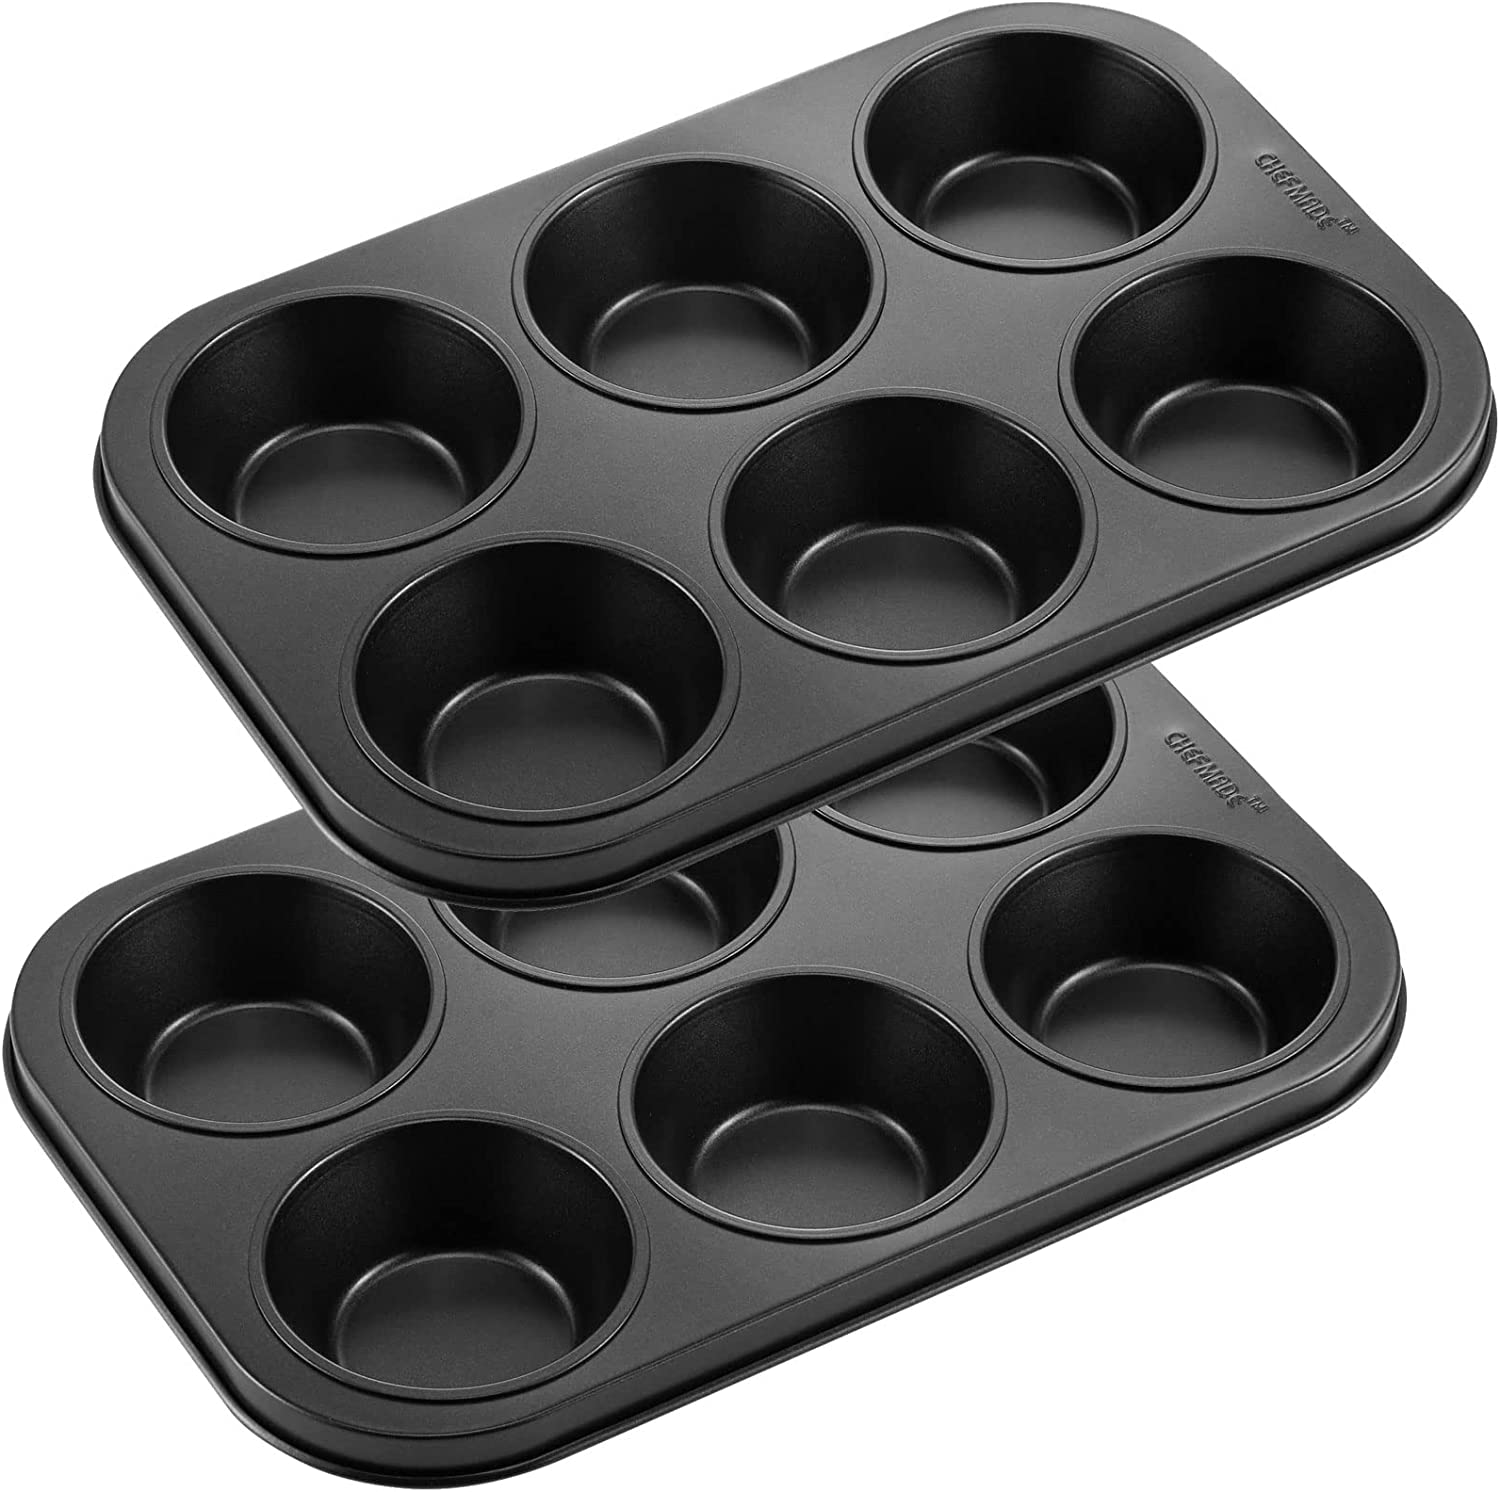 Muffin Pan 6 Well